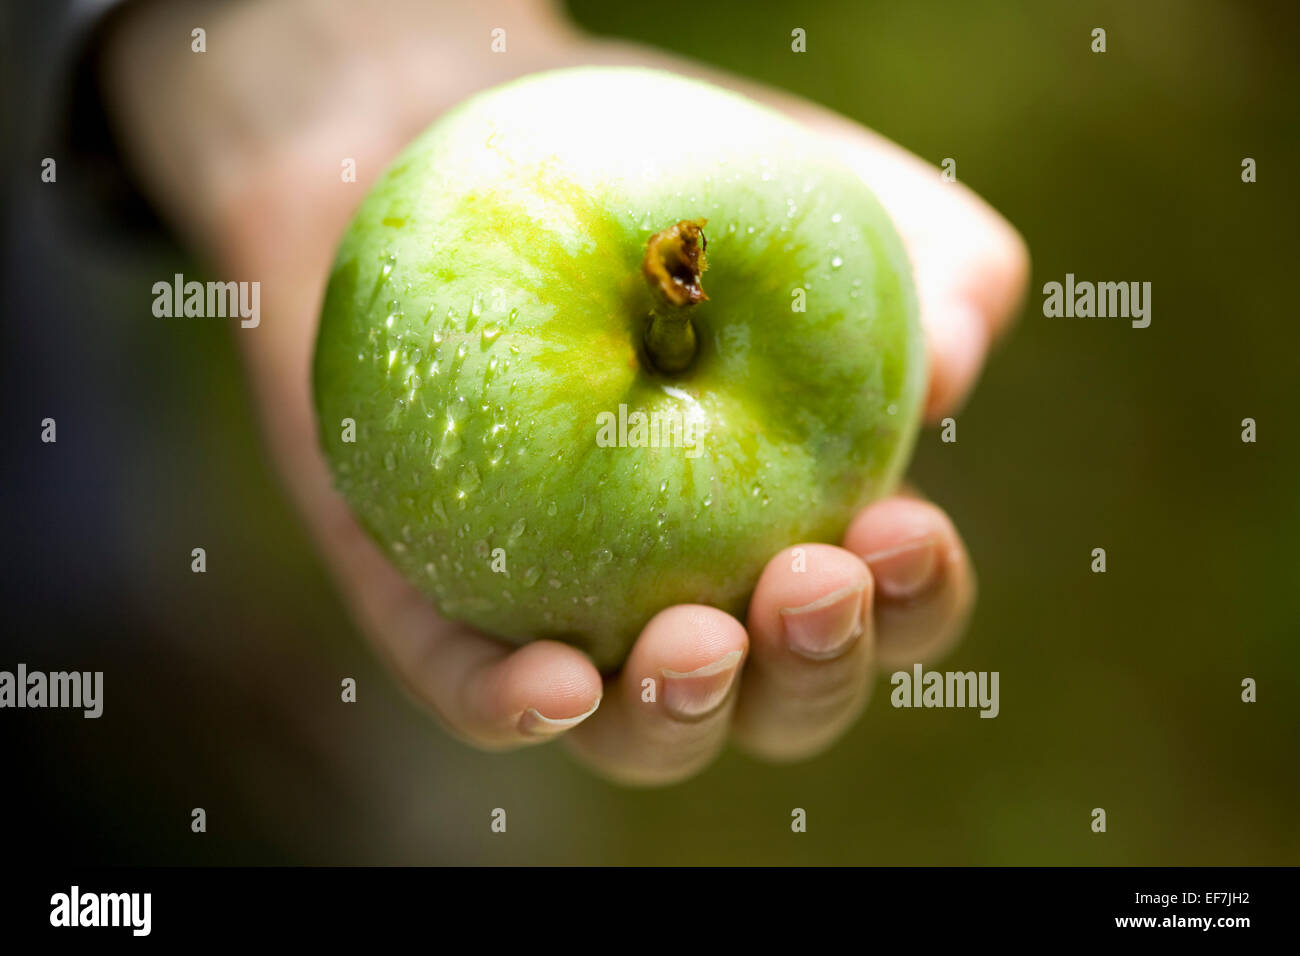 Hand holding fresh green apple Banque D'Images